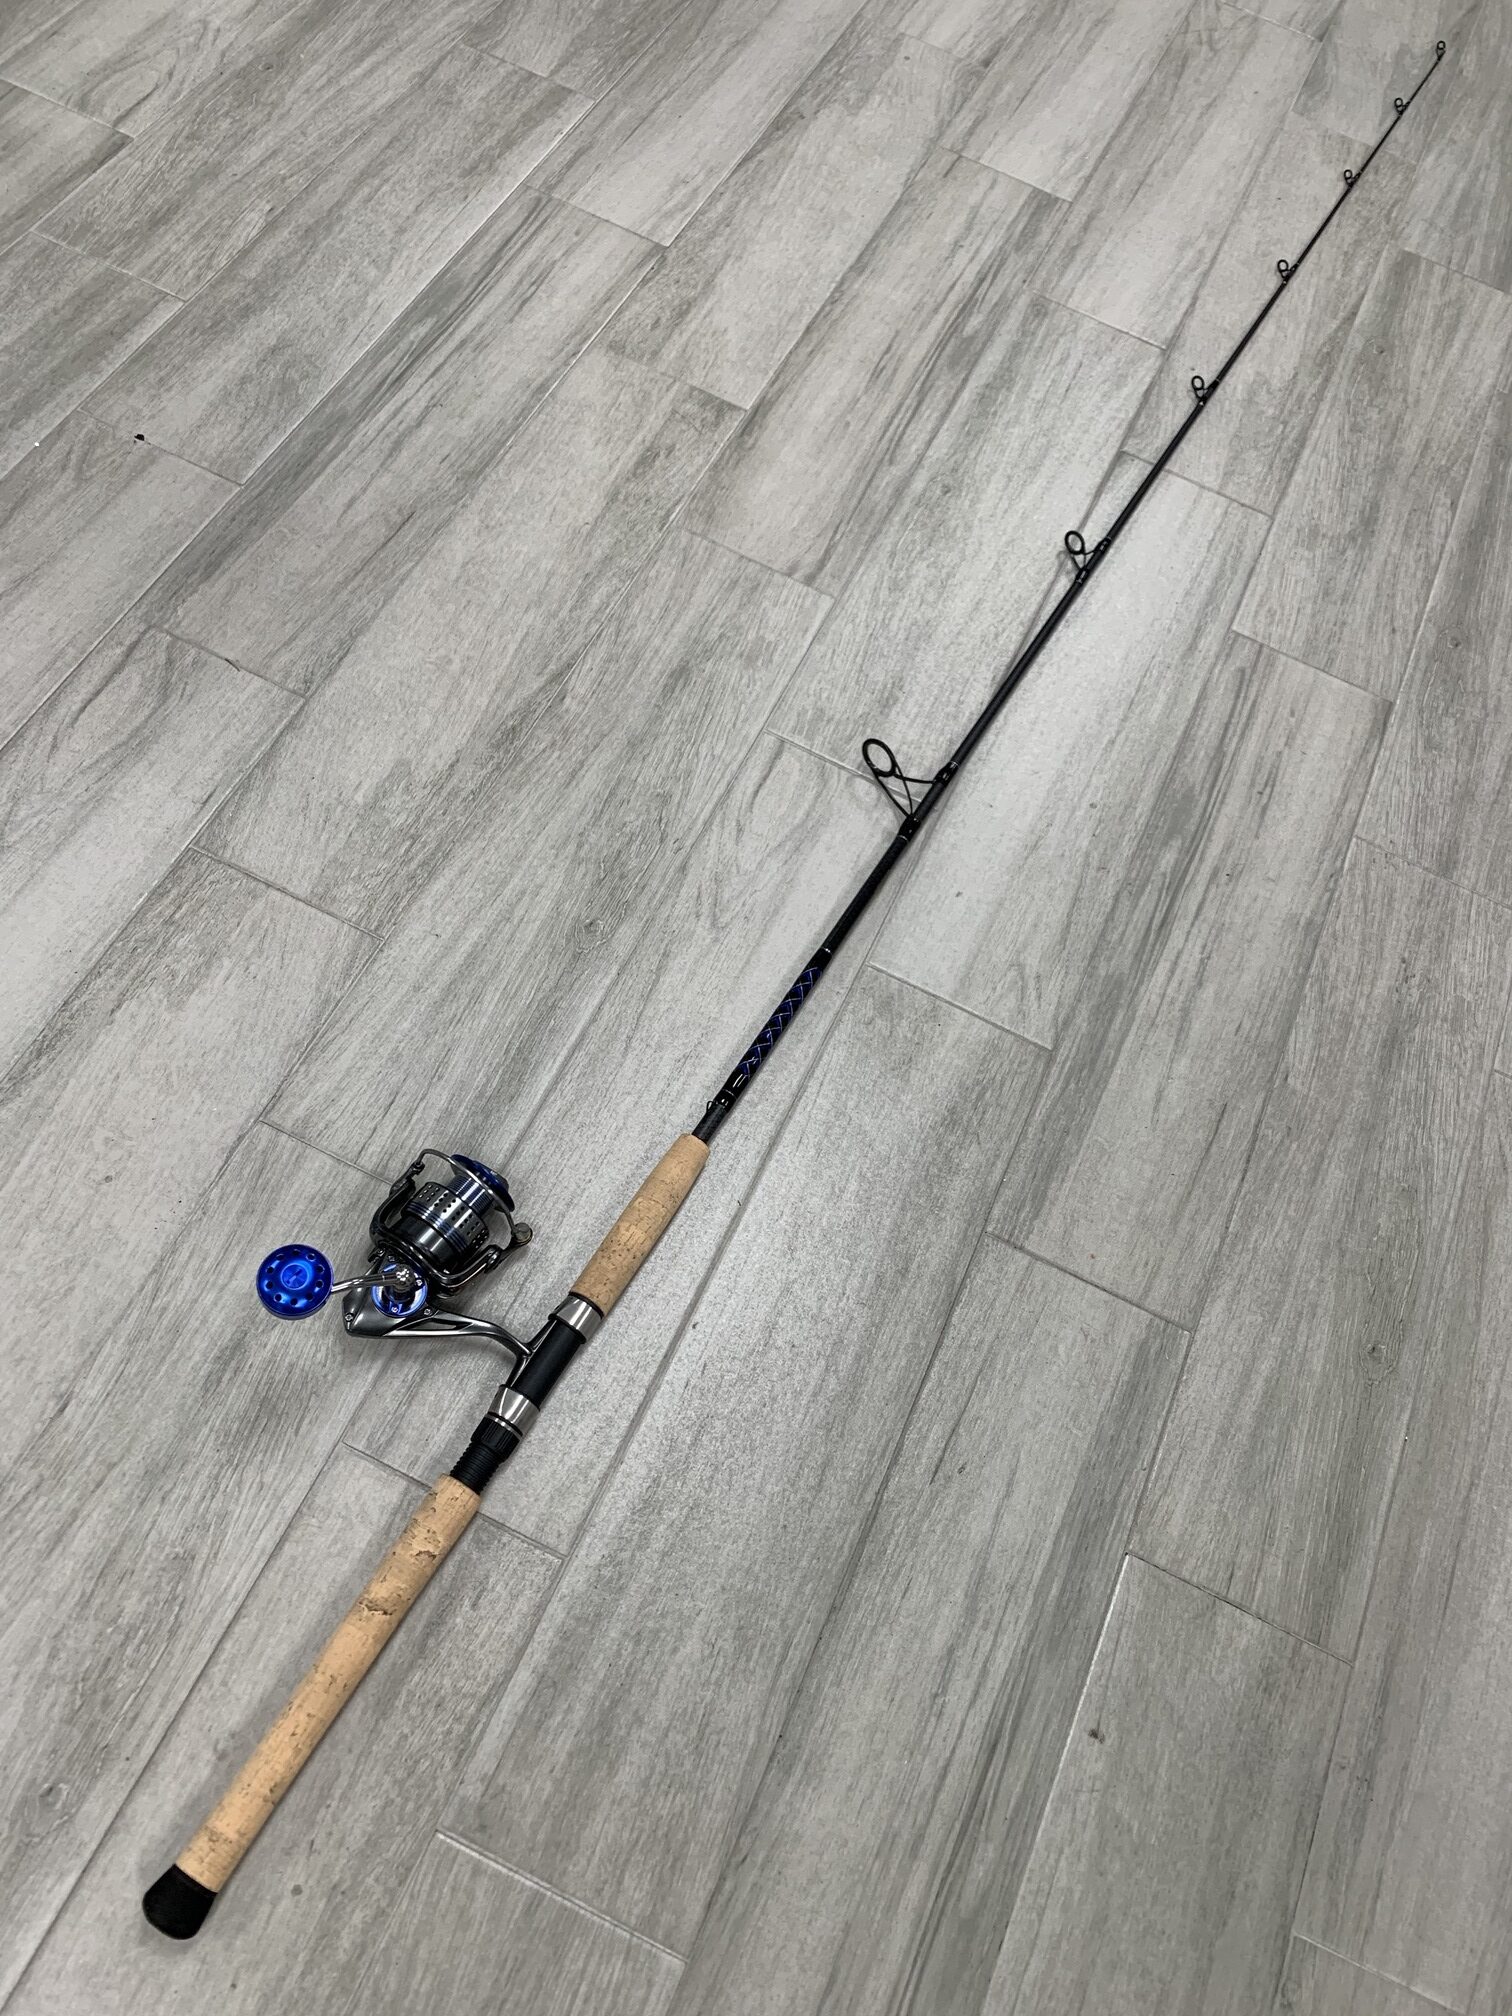 7′ 12-20# Inshore Carbon Fiber Spinning Rod with Canyon 3500 Spinning Reel  Blue-Silver – Connley Fishing